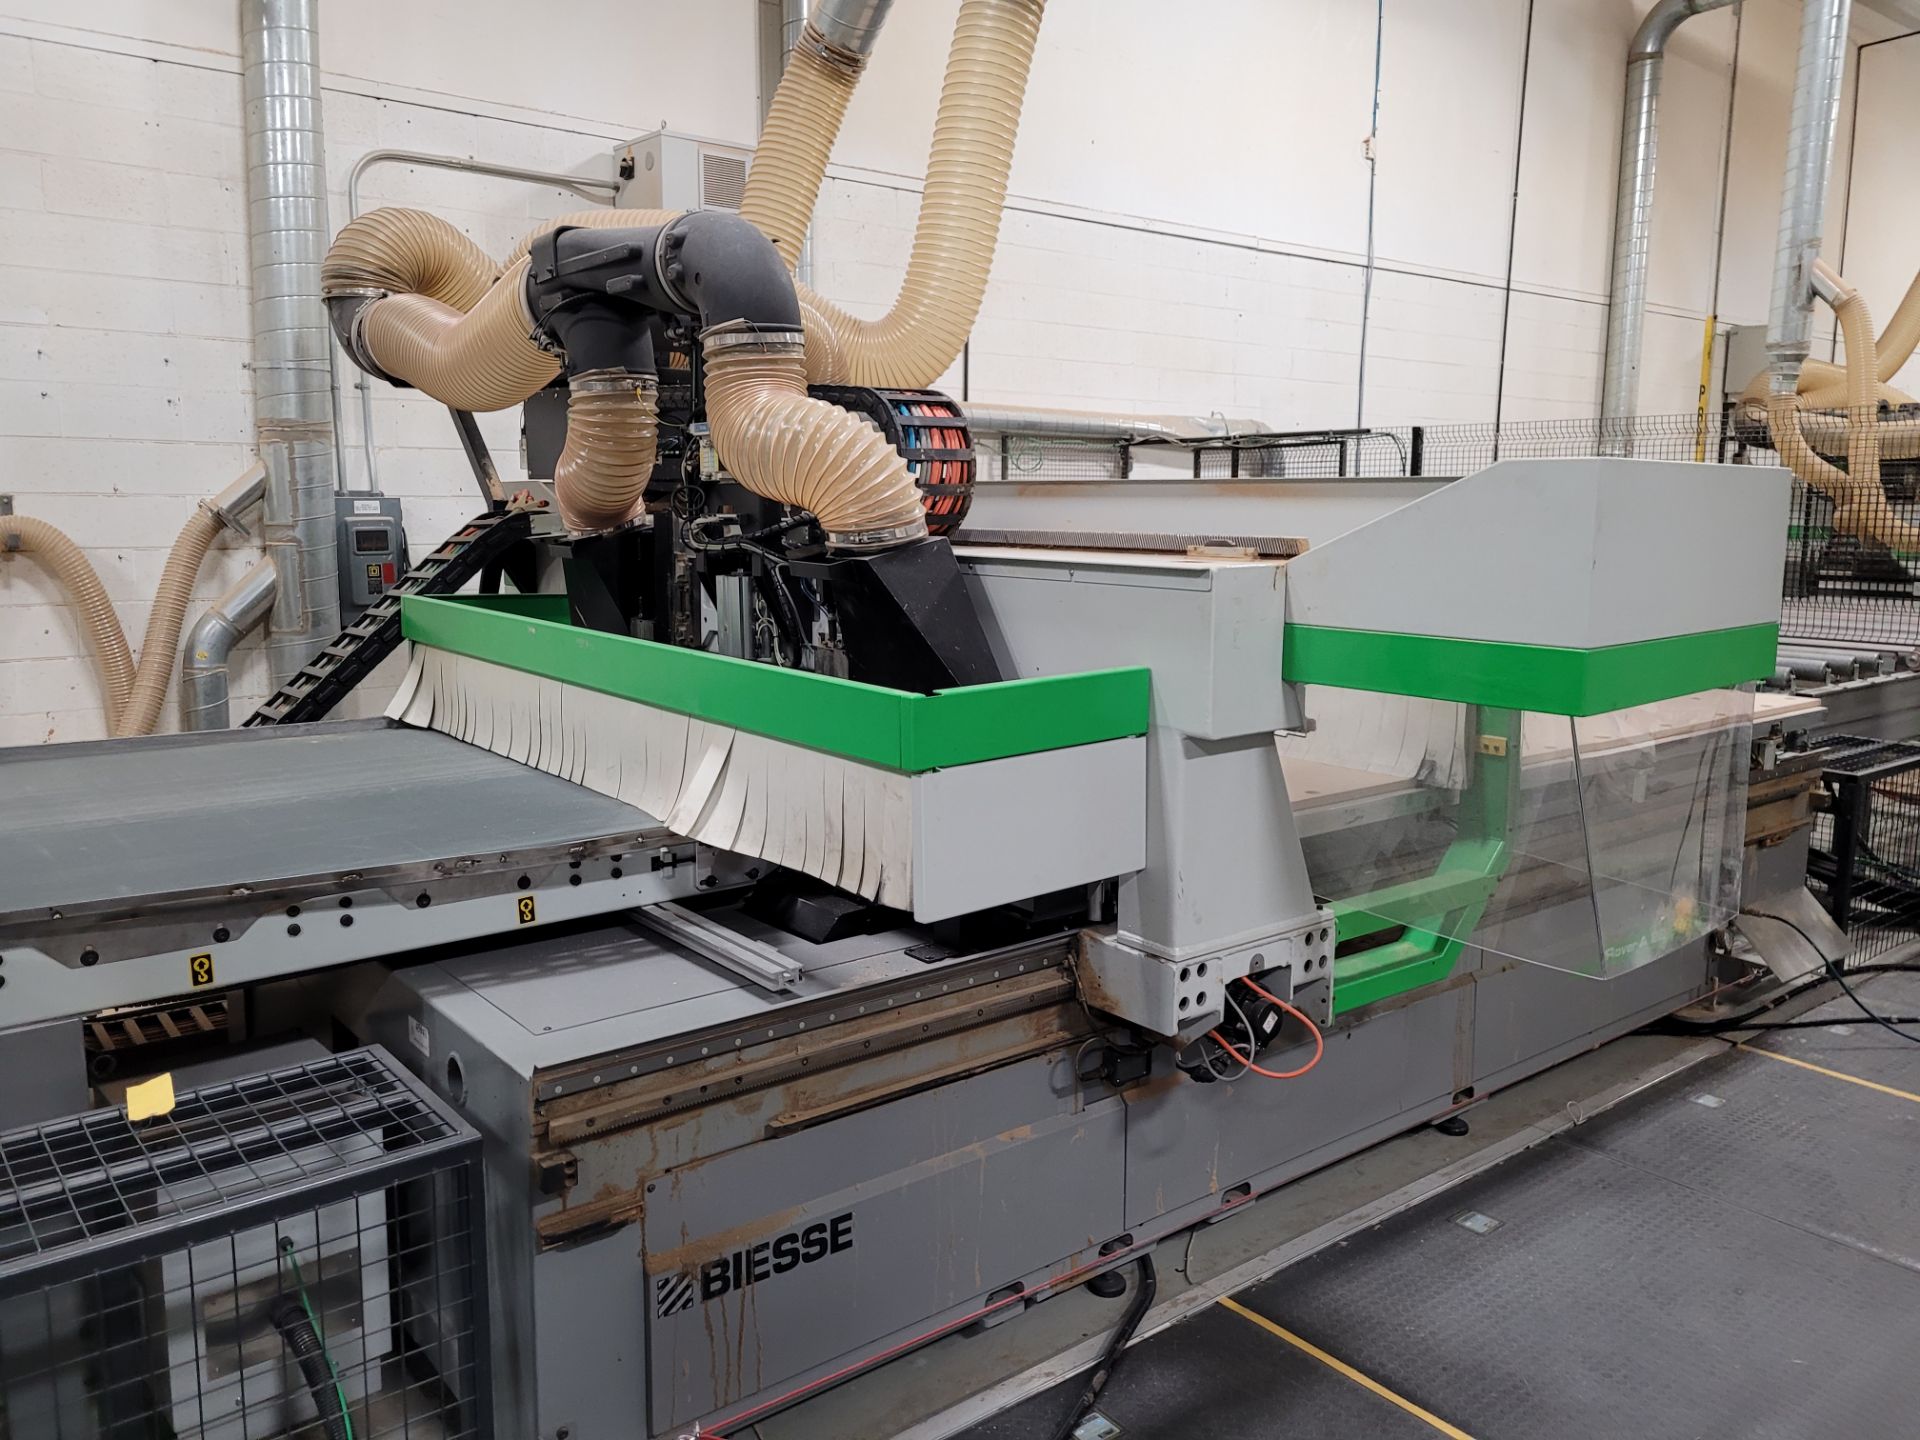 2011 BIESSE Flat Table CNC Router mod. Rover-A-22-31-GFT, 2200mm x 3100mm, ser. 45941 w/ CNC Control - Image 7 of 8